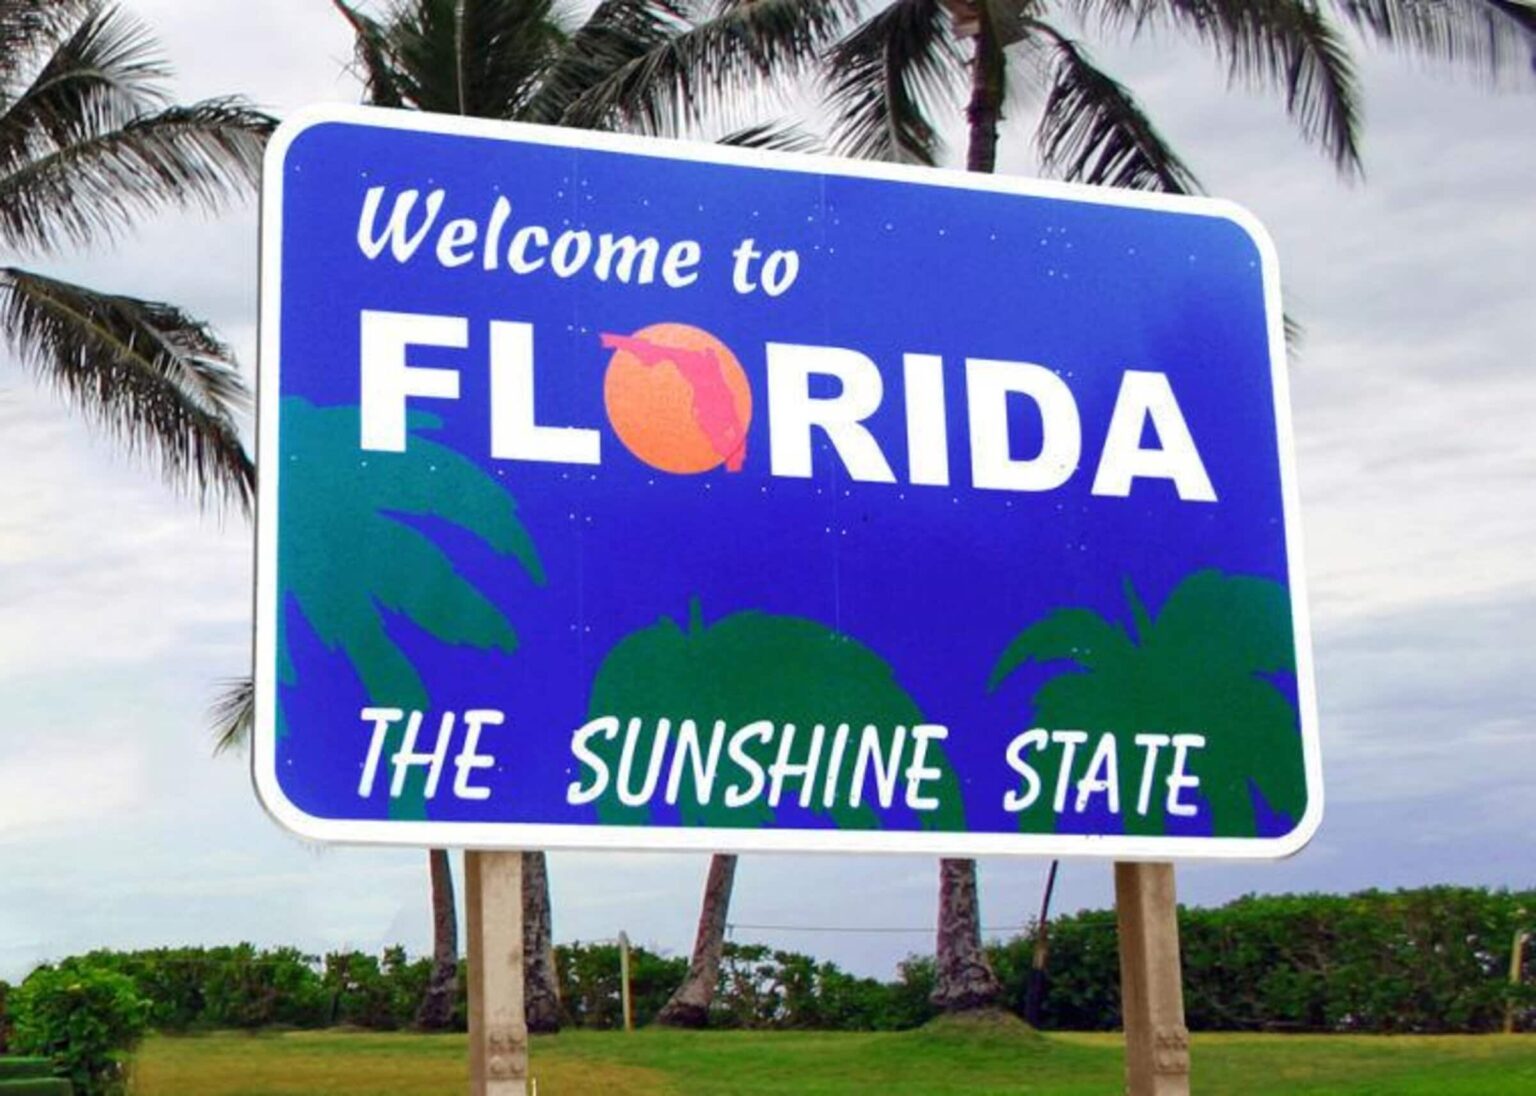 Ah, Florida Man! With endless headlines about his antics, we have endless memes to cringe at. Roar with laughter at these stories from the Sunshine State.